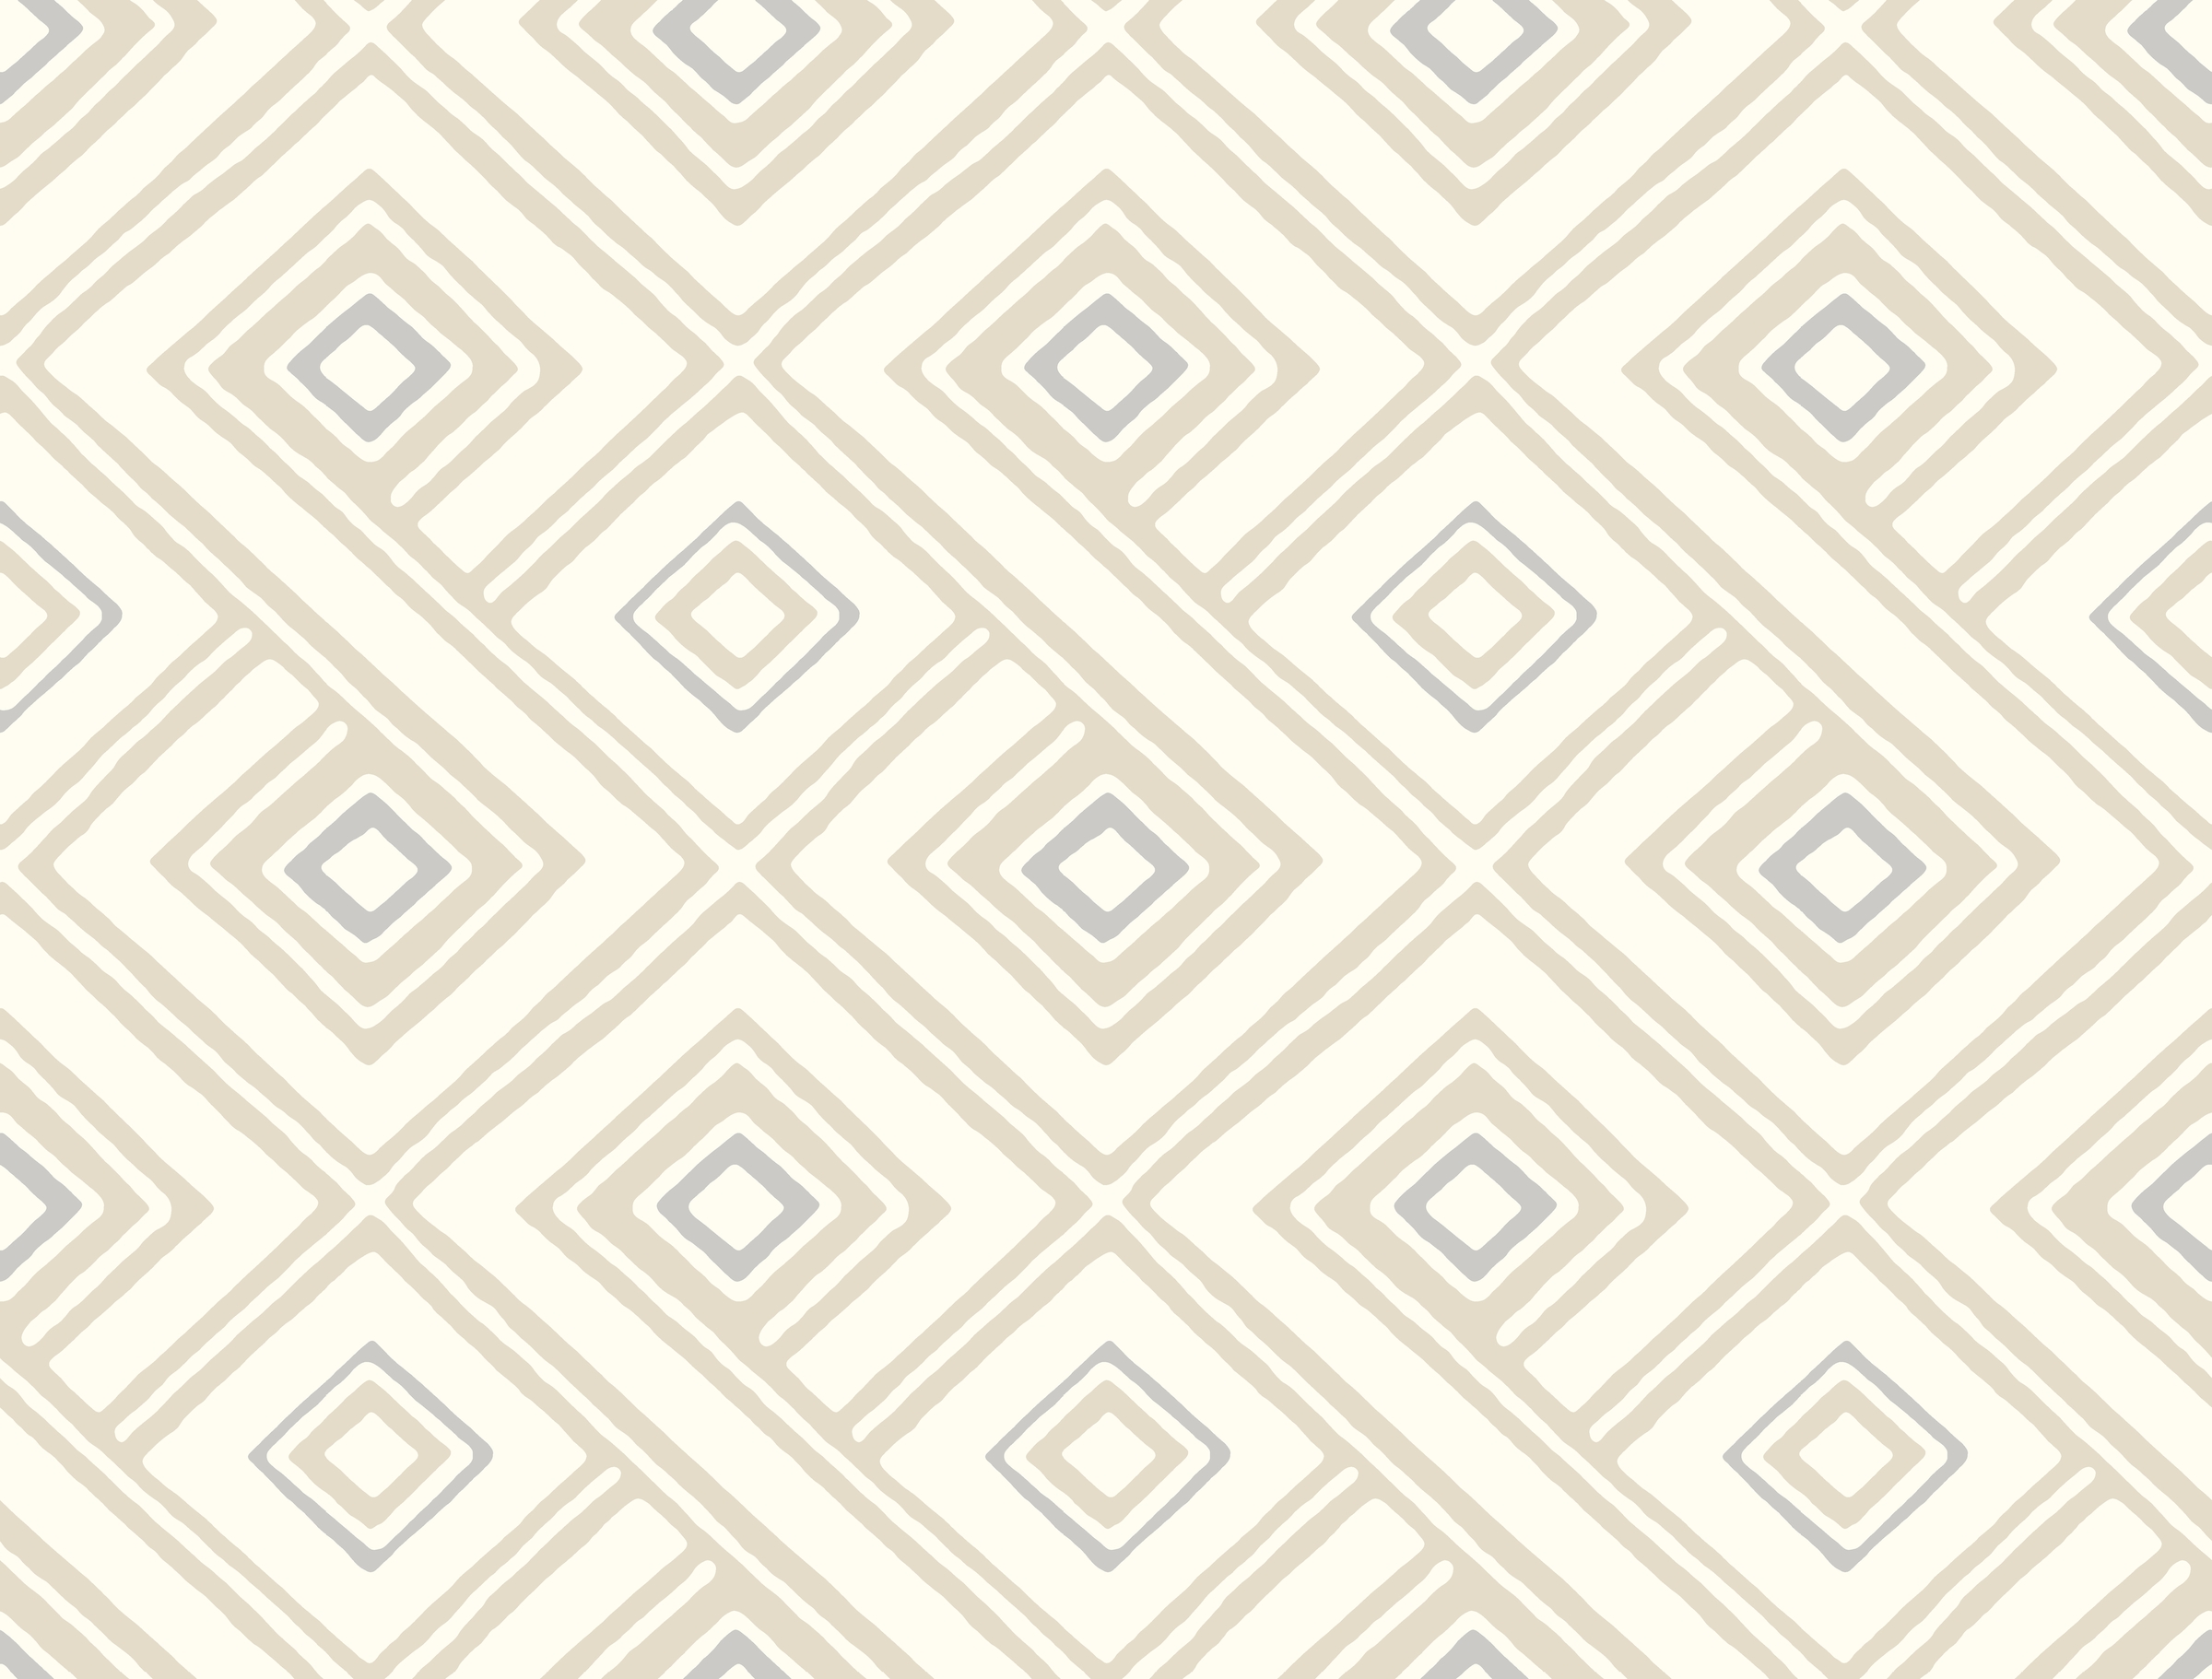 Details About York Wallcoverings Hs2013 Pattern Play - Floor , HD Wallpaper & Backgrounds